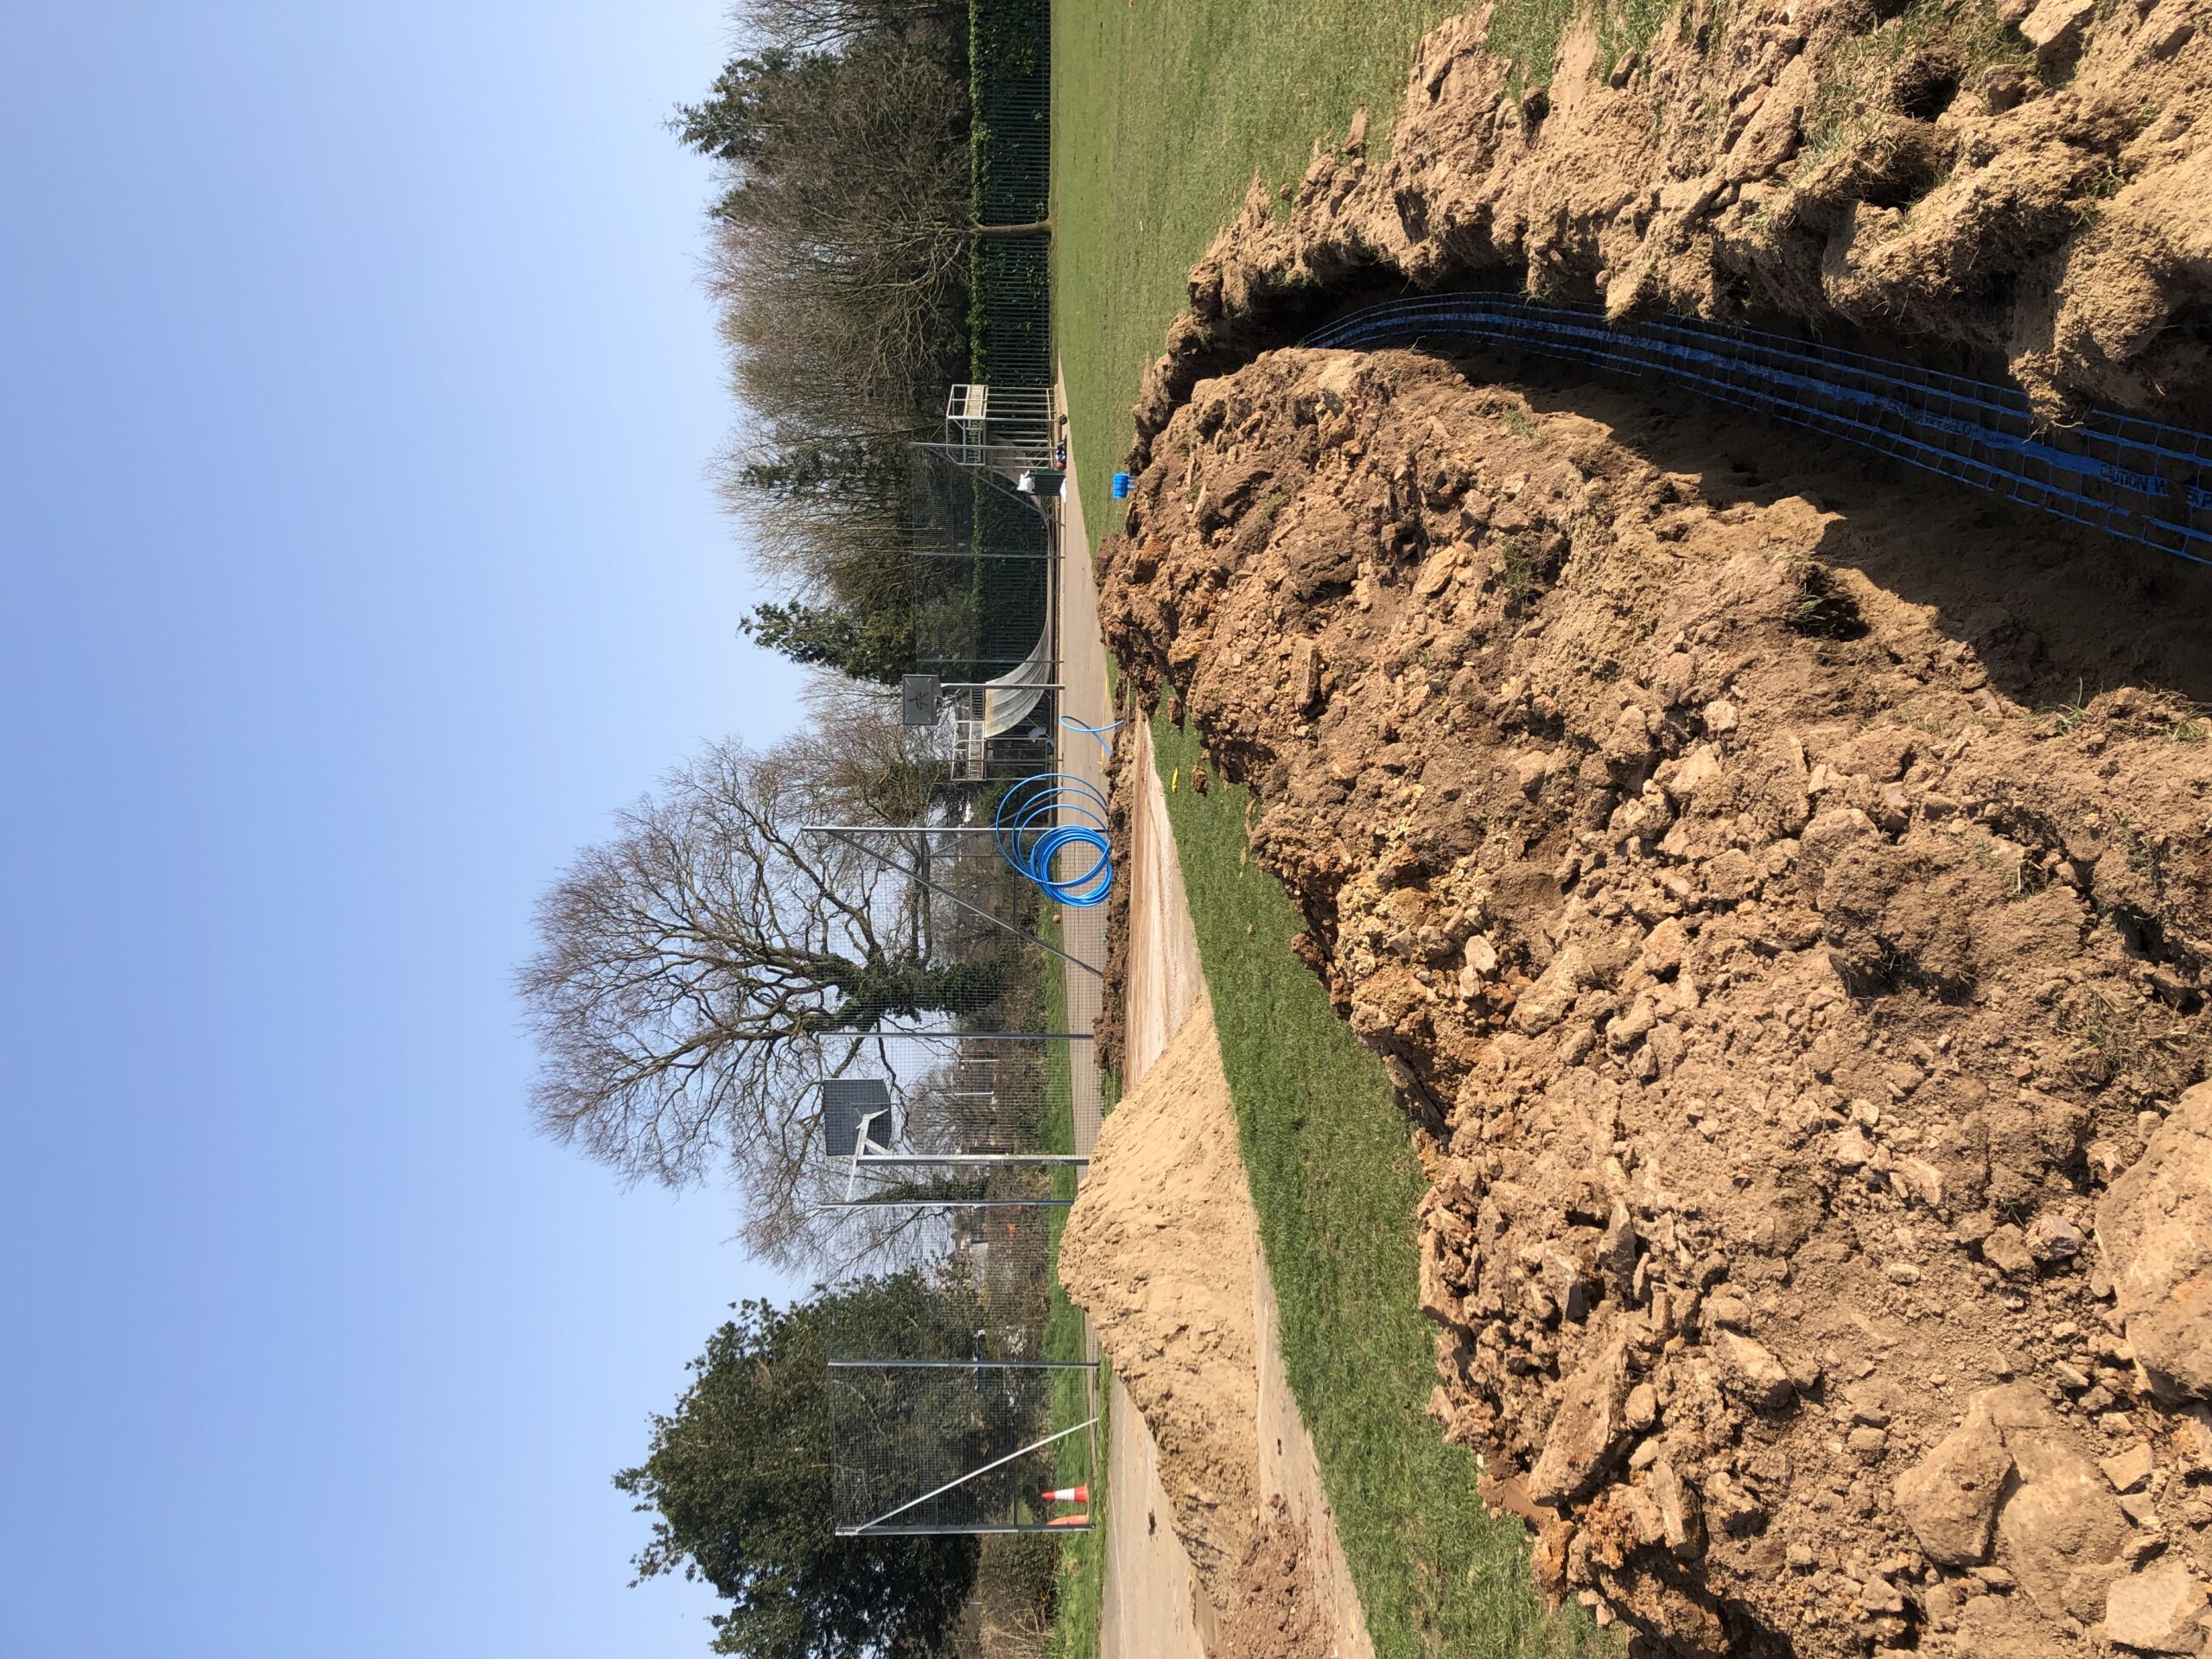 Installation of the new irrigation system at the cricket pitch at The Park. A long narrow trench cut in the turf.